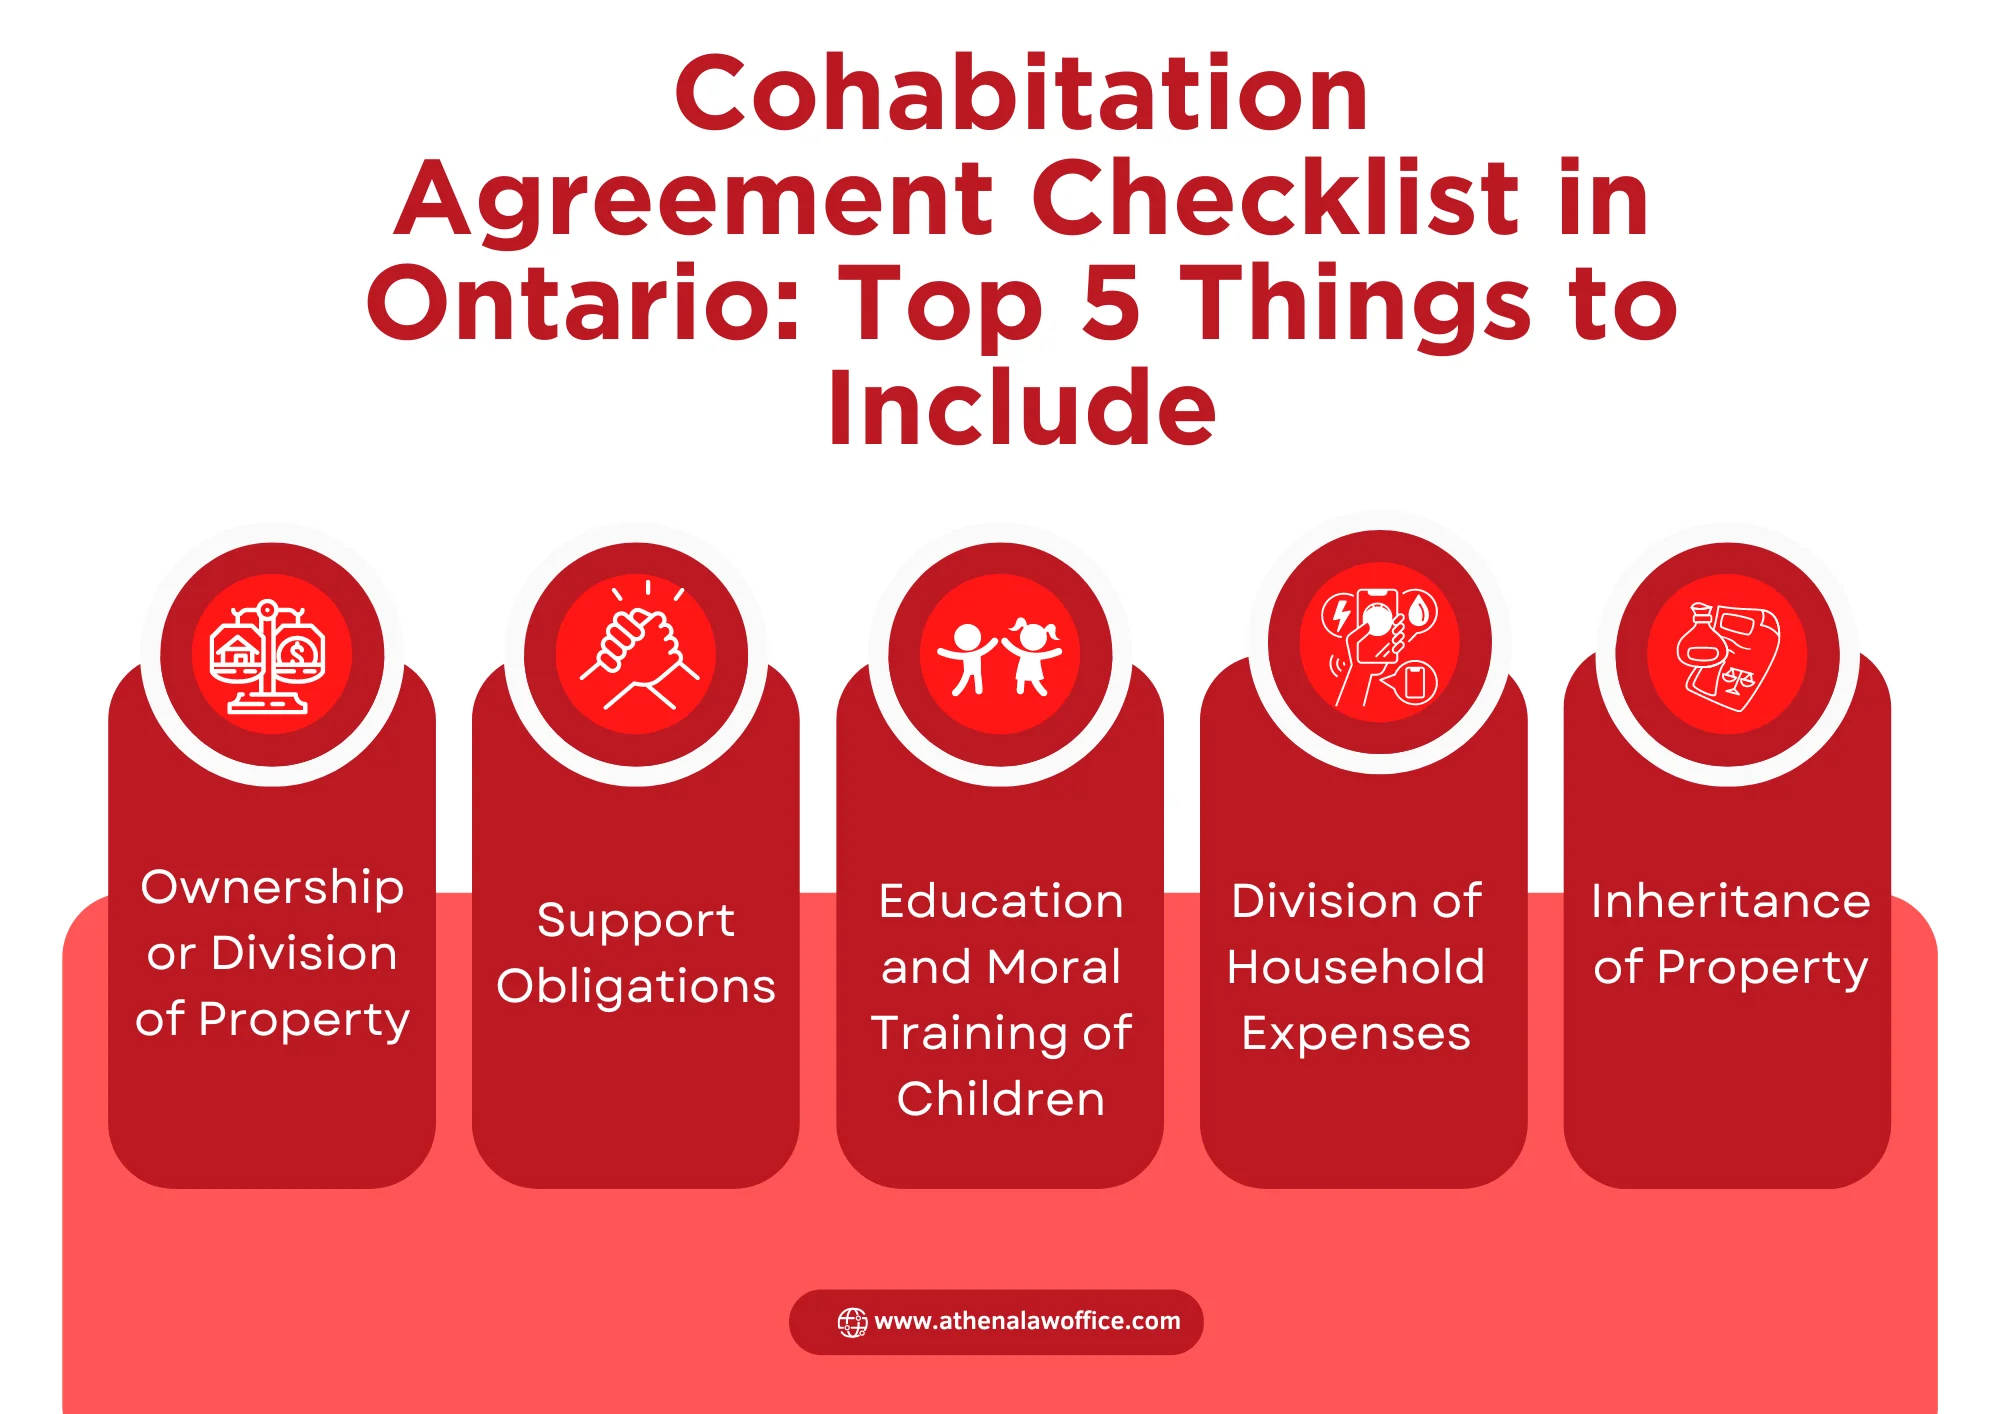 An diagram of the cohabitation agreement in Ontario checklist